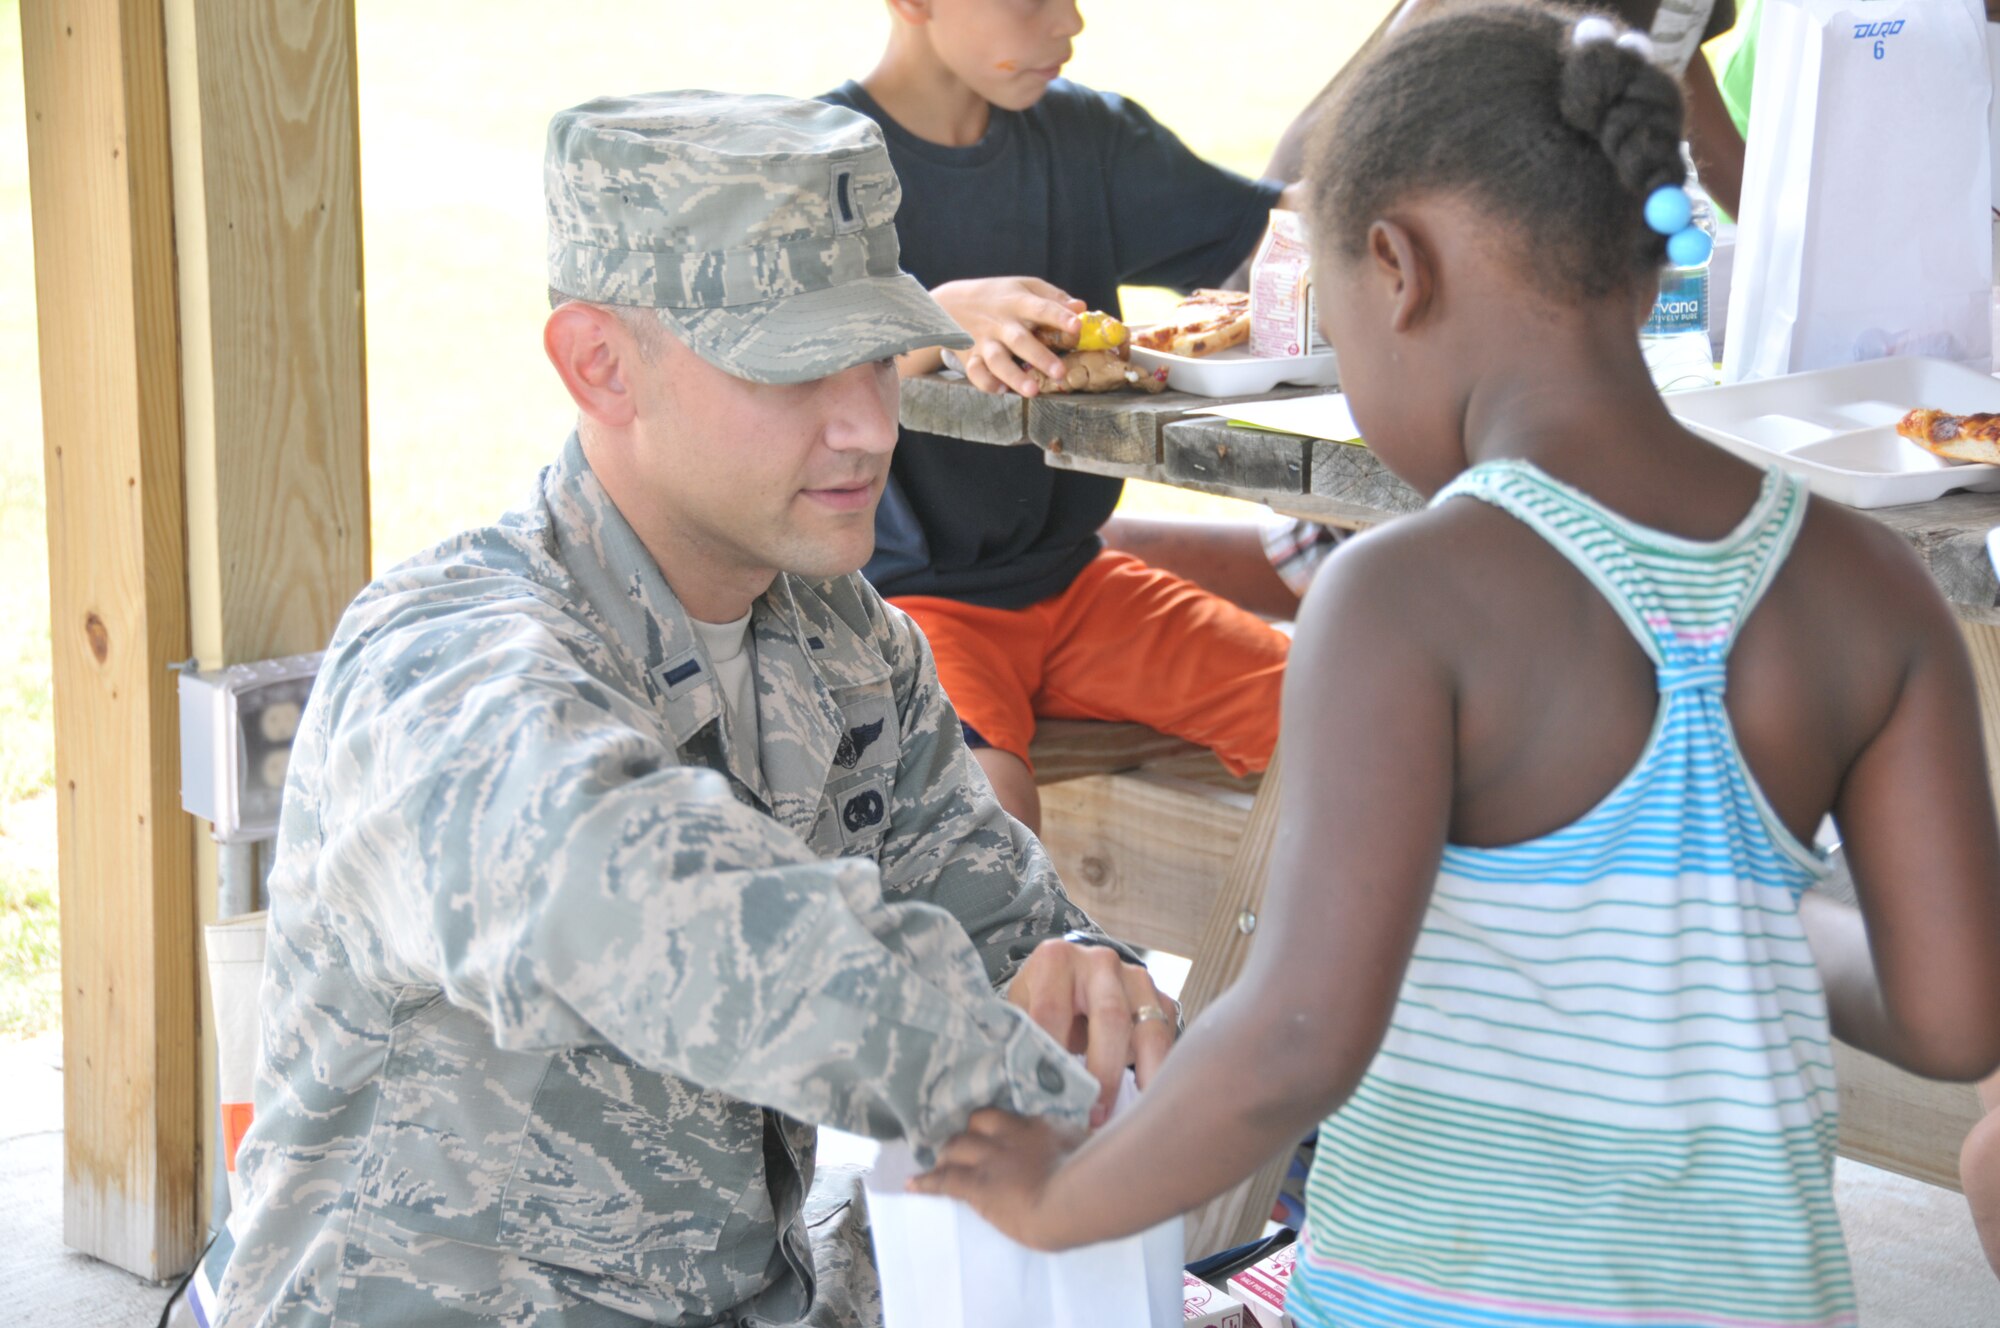 First Lt. Jared Semerad, 109th Logistics Readiness Squadron, hands out lunches to youth at Steinmetz Park in Schenectady, New York, July 25, 2014. About 30 Airmen from the 109th Airlift Wing volunteered throughout the week to help with Schenectady Inner City Ministry's Summer Lunch Program. The ministry has been providing free lunches to youth throughout Schenectady for 20 years. (U.S. Air National Guard photo by Tech. Sgt. Catharine Schmidt/Released)